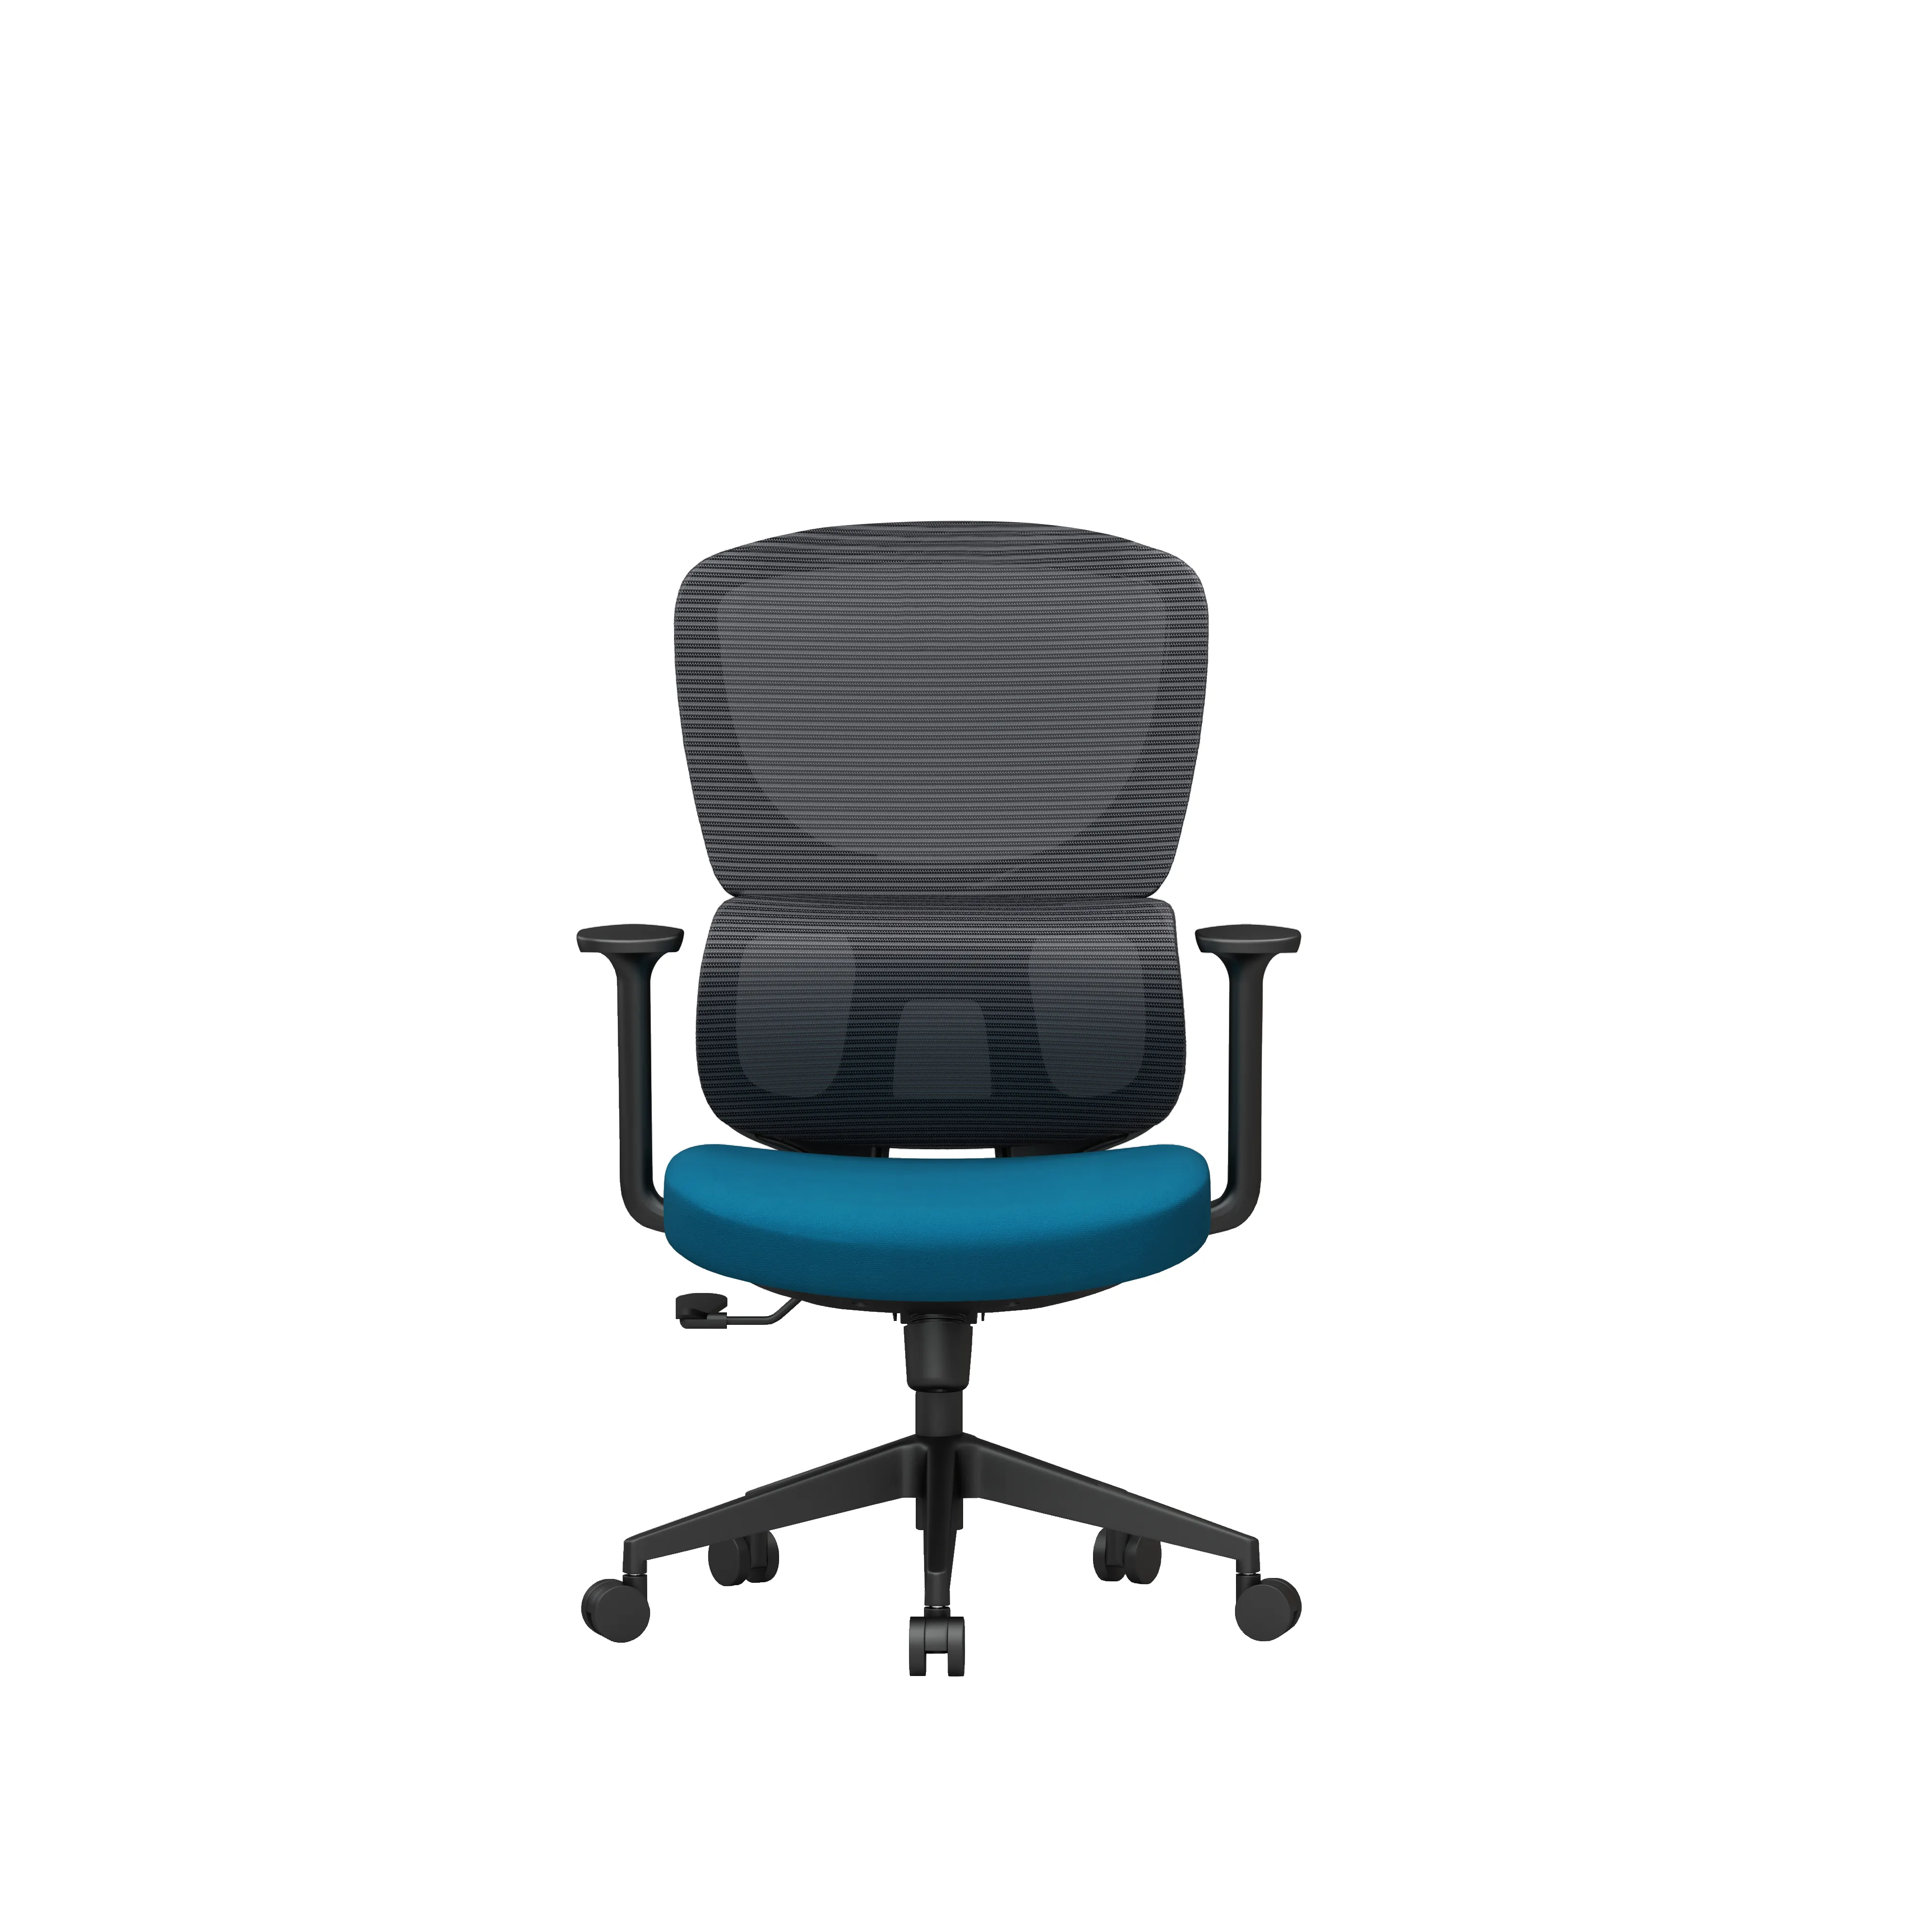 Height Adjustable Work Chair Ergonomic Mid-Back Mesh Swivel Office Chairs Computer Office Game Chair